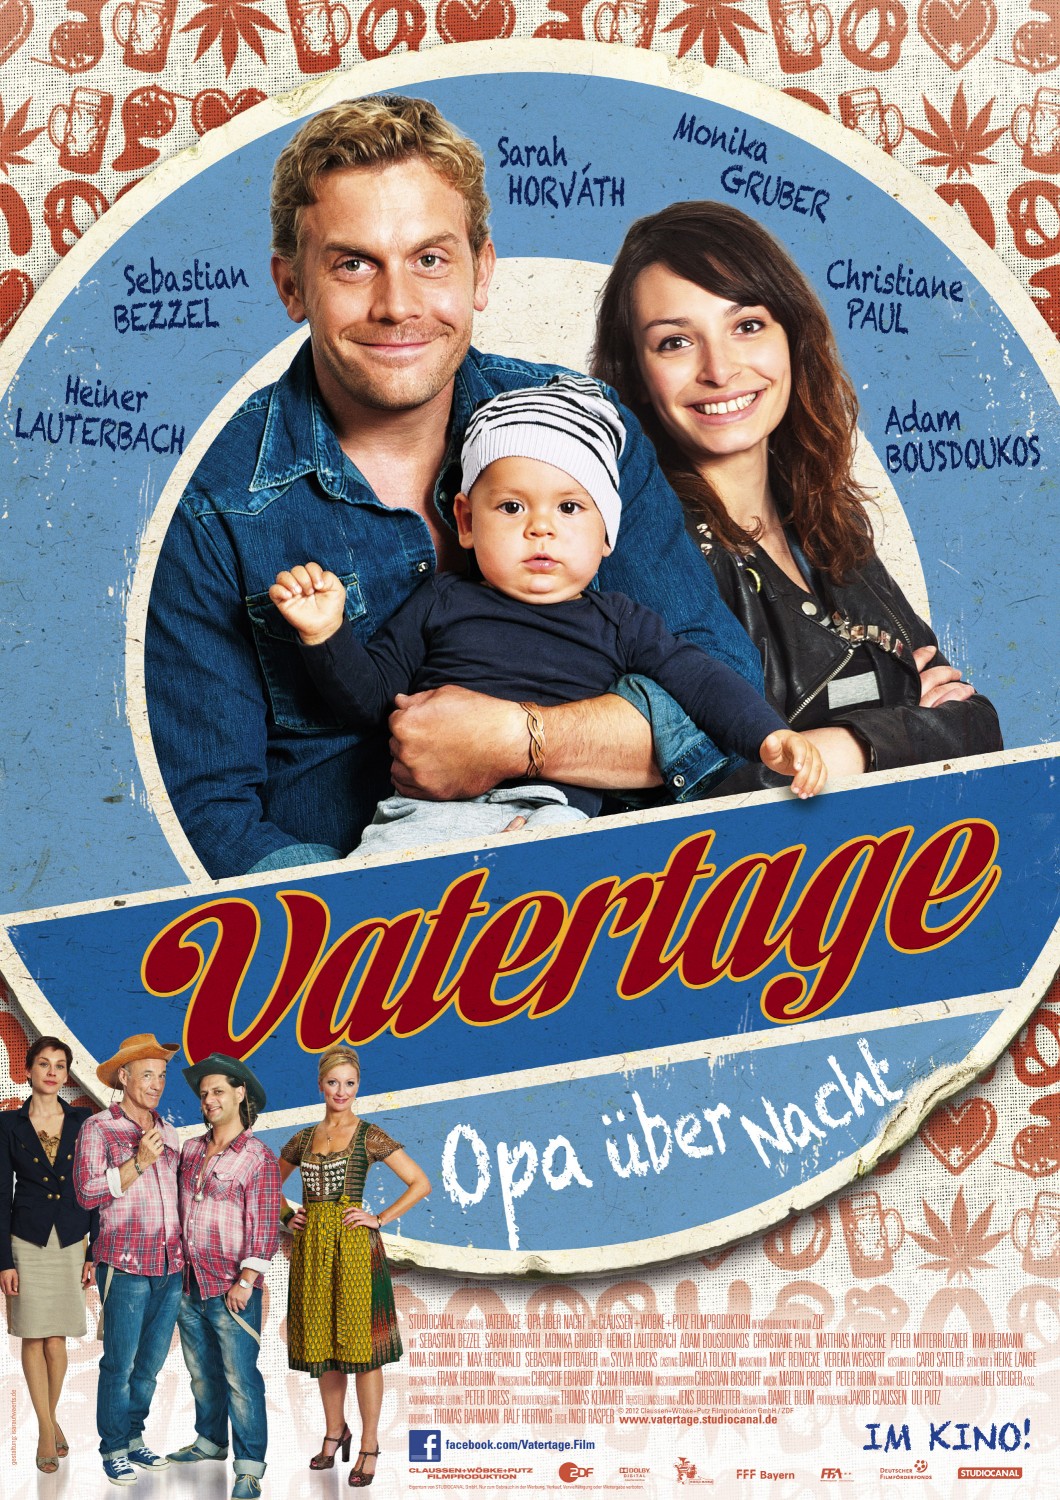 Extra Large Movie Poster Image for Vatertage - Opa über Nacht 